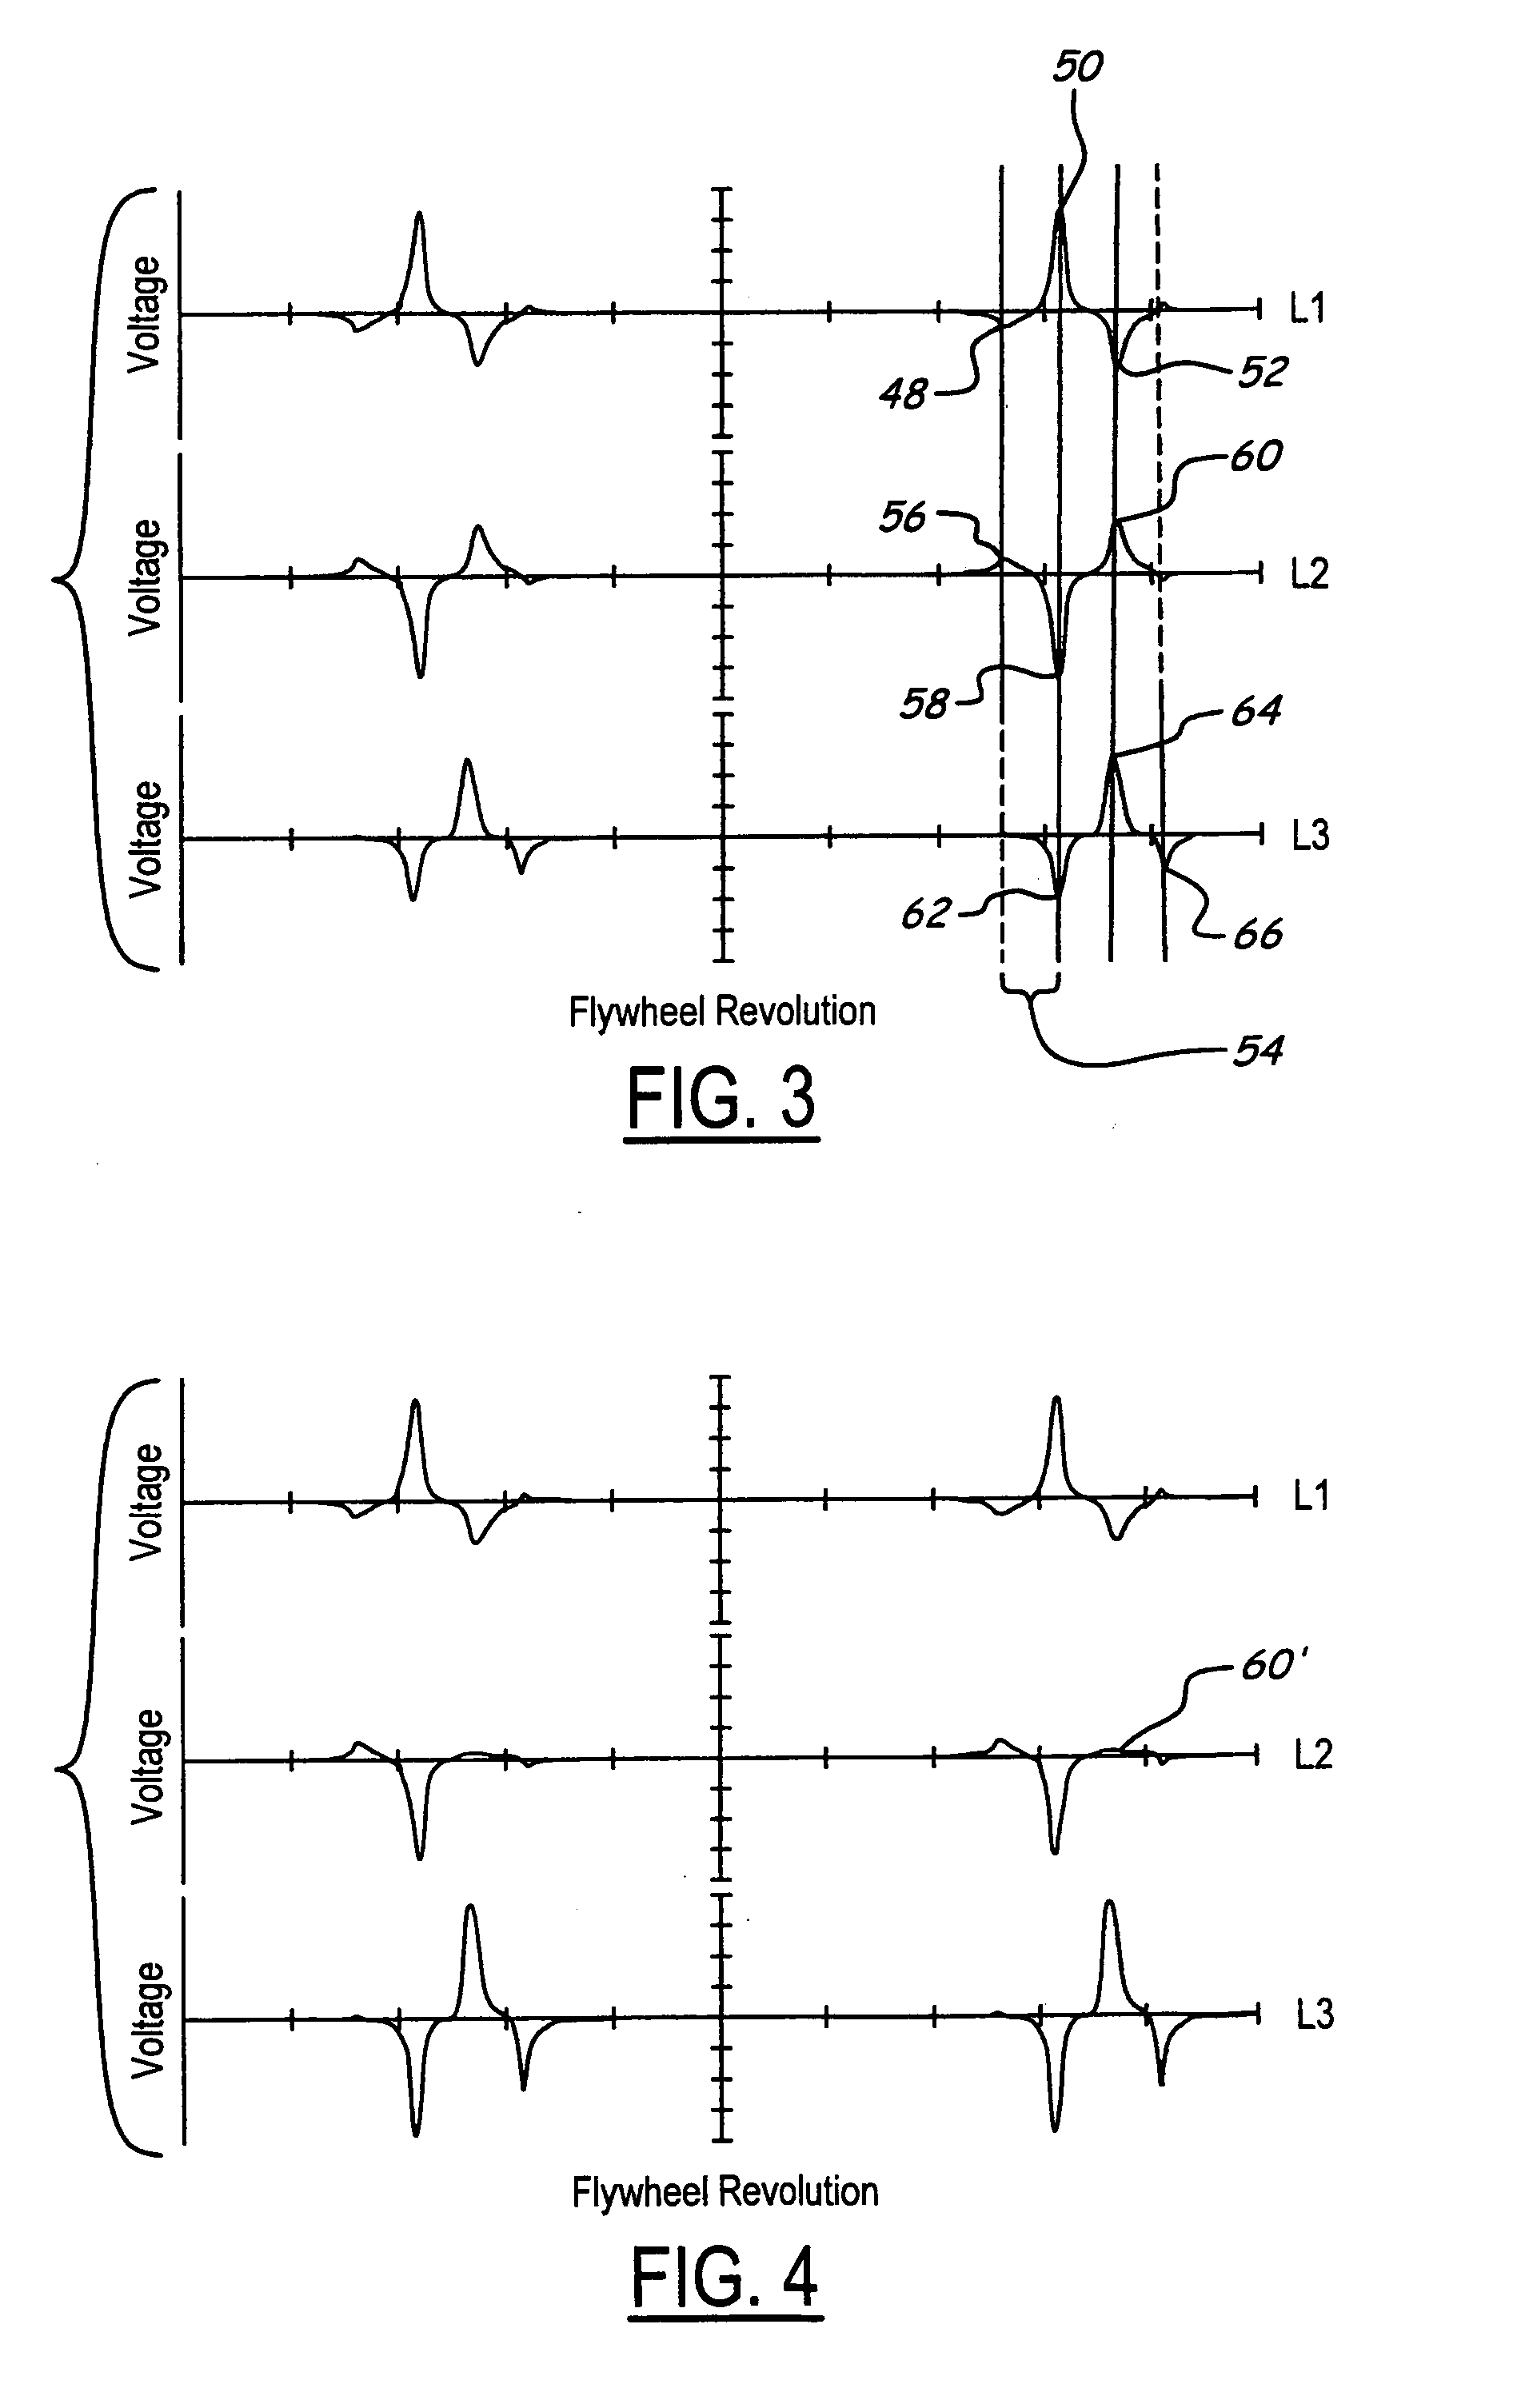 Capacitor discharge ignition